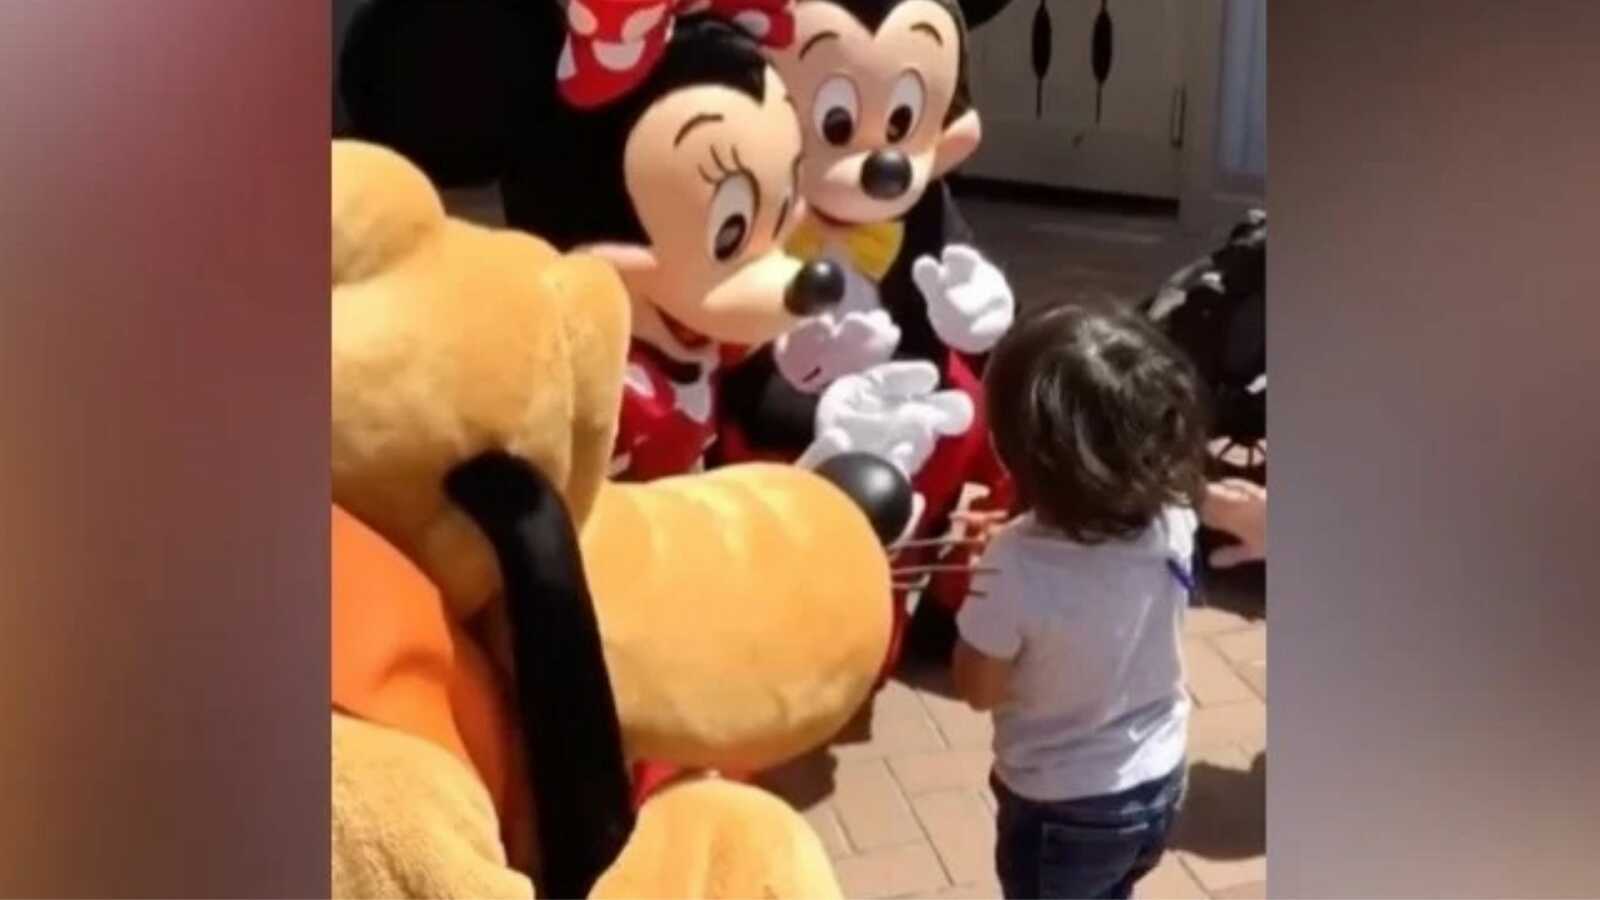 little boy meeting mickey and minnie mouse